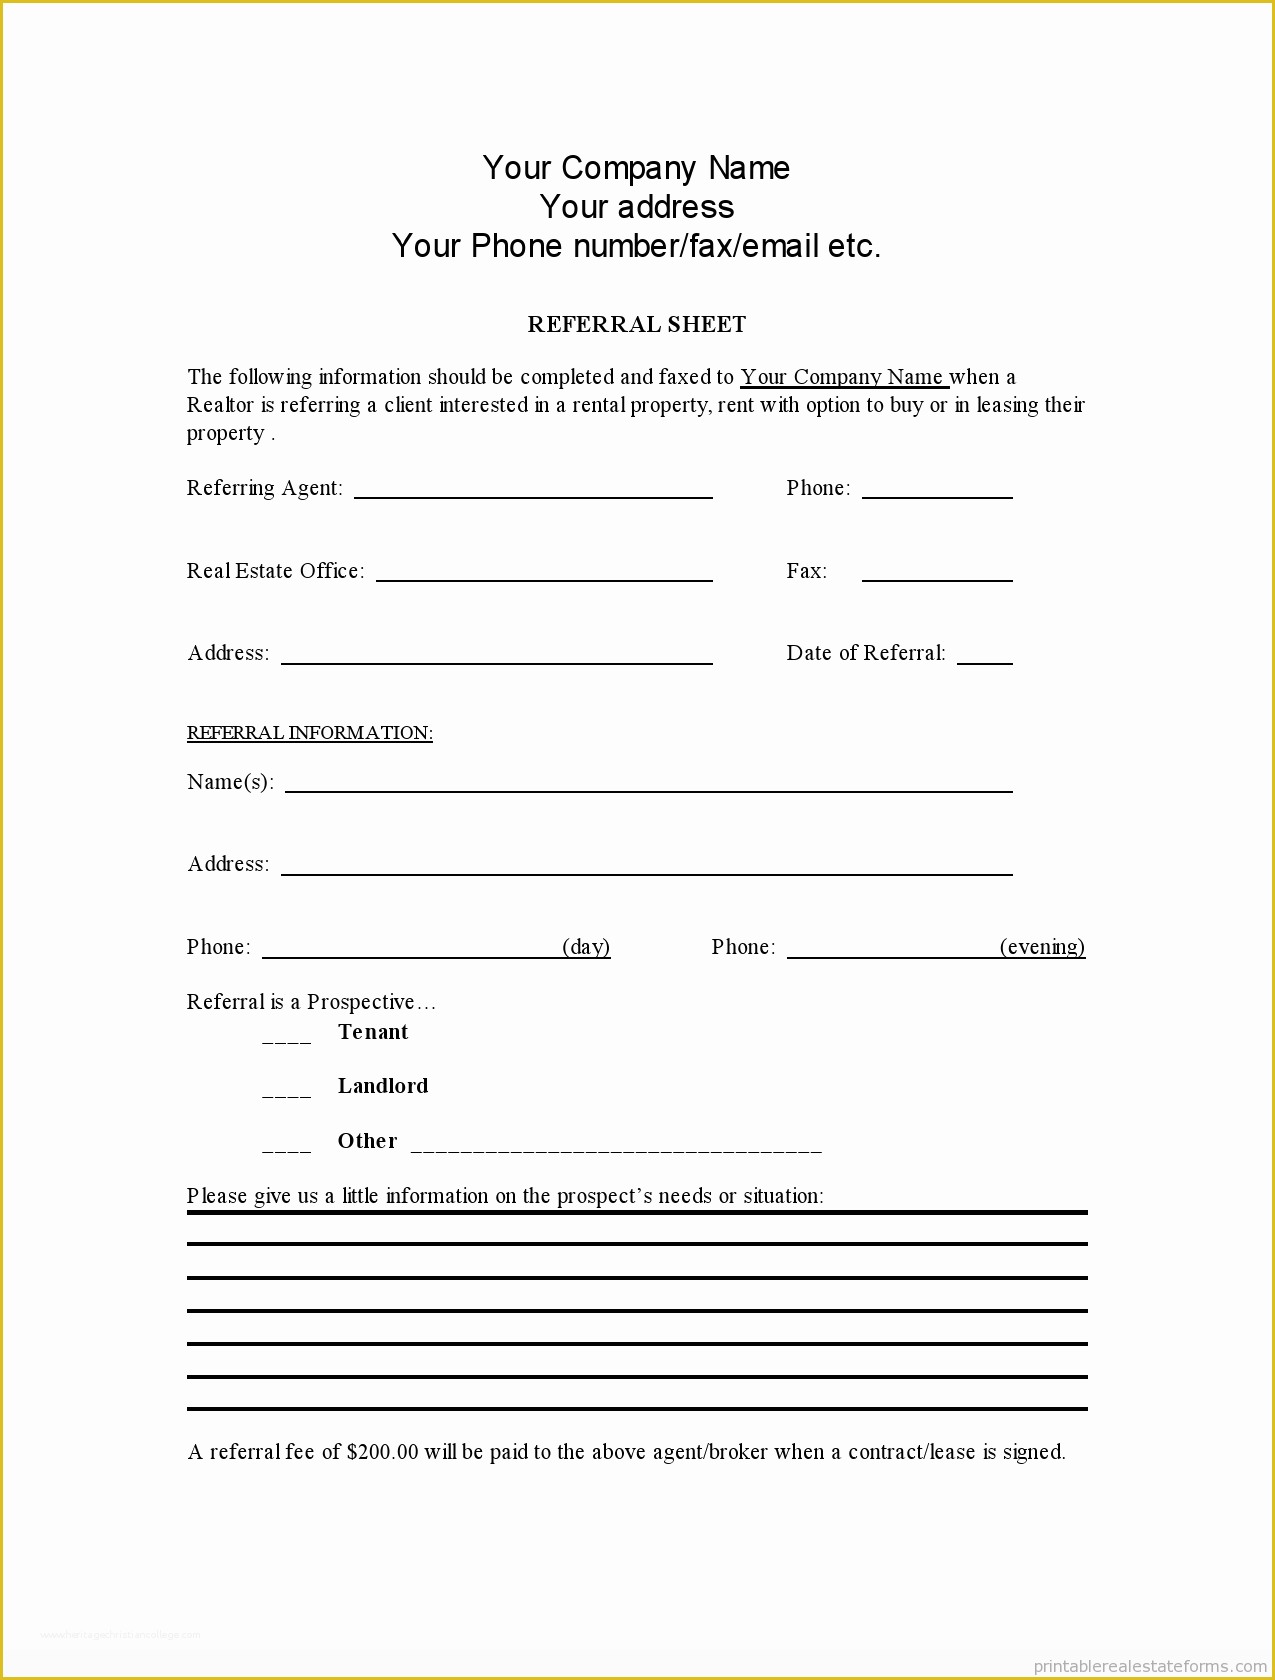 Free Real Estate Referral form Template Of Free Printable Real Estate Referral form Template Pdf